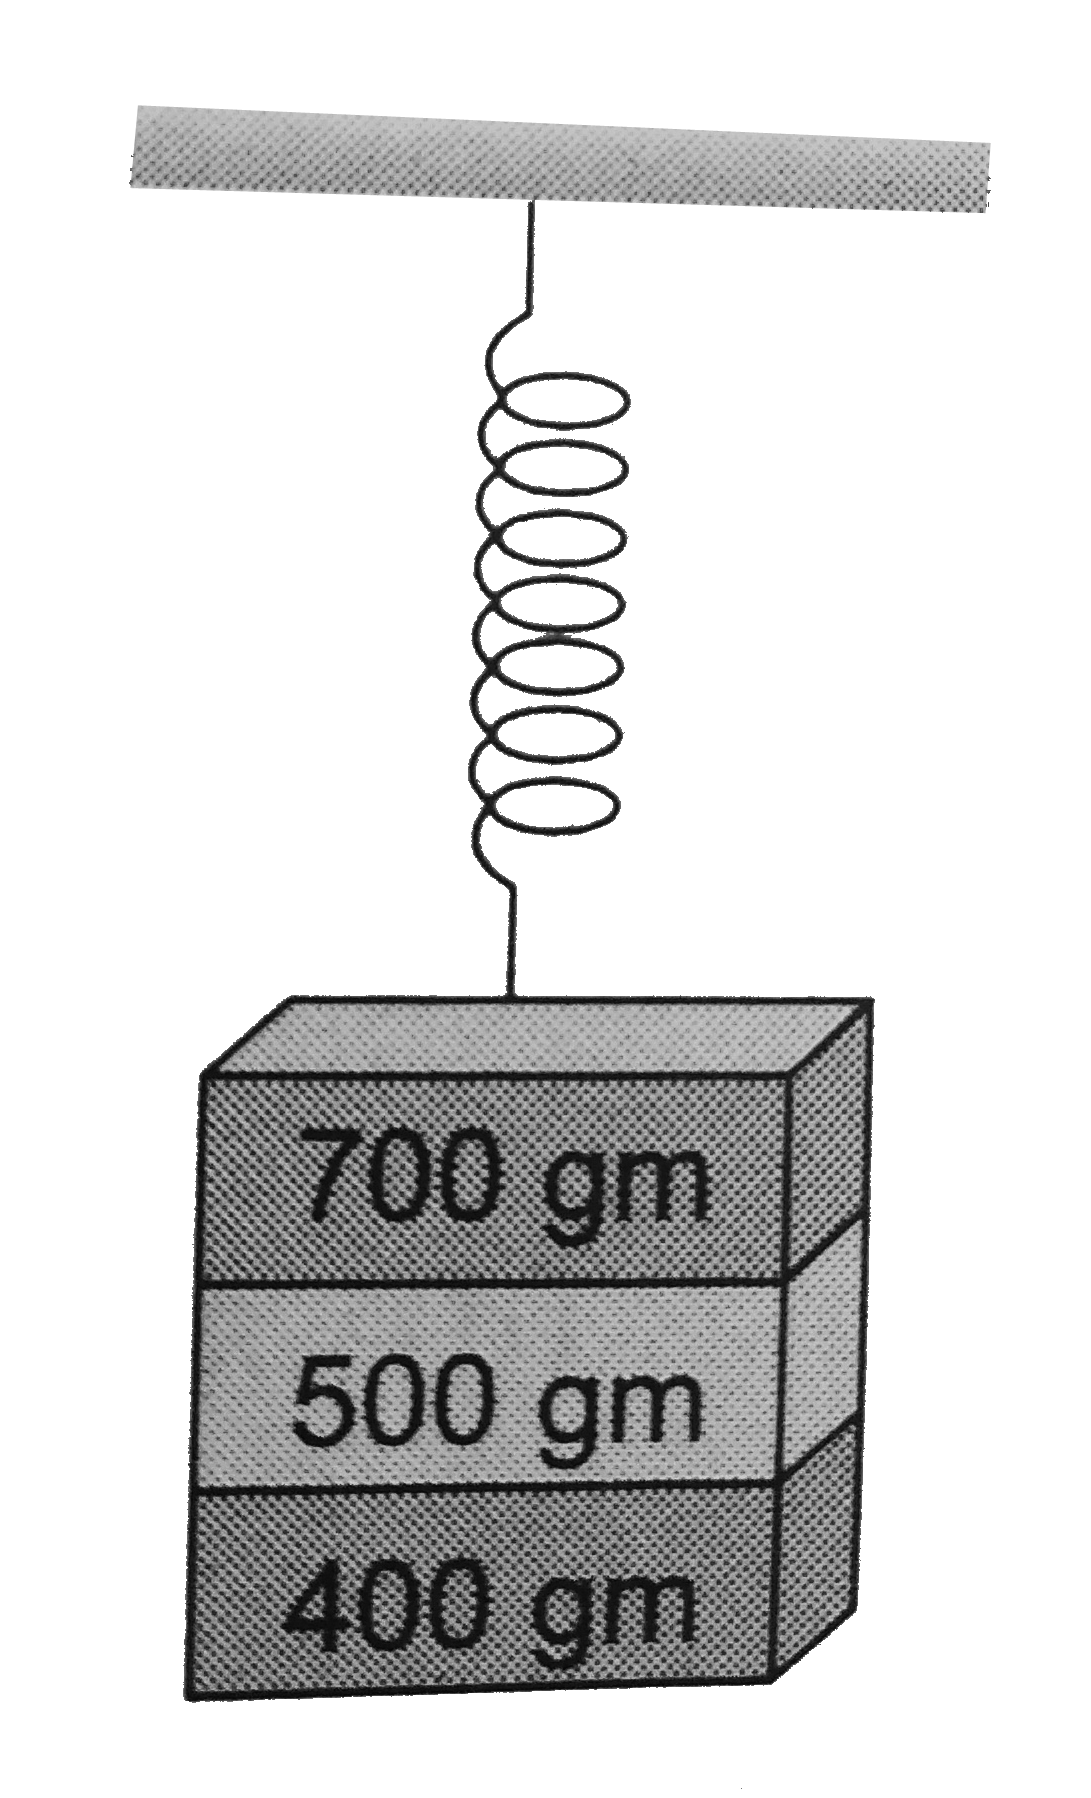 Three masses 700g and 500g and 400g are suspended at the and of a spring a shown and are in equilibrium When the 700g mass is removed the system oscillation with a period of 3 second when the 500gm mass is also removed it will oscillation with a period of